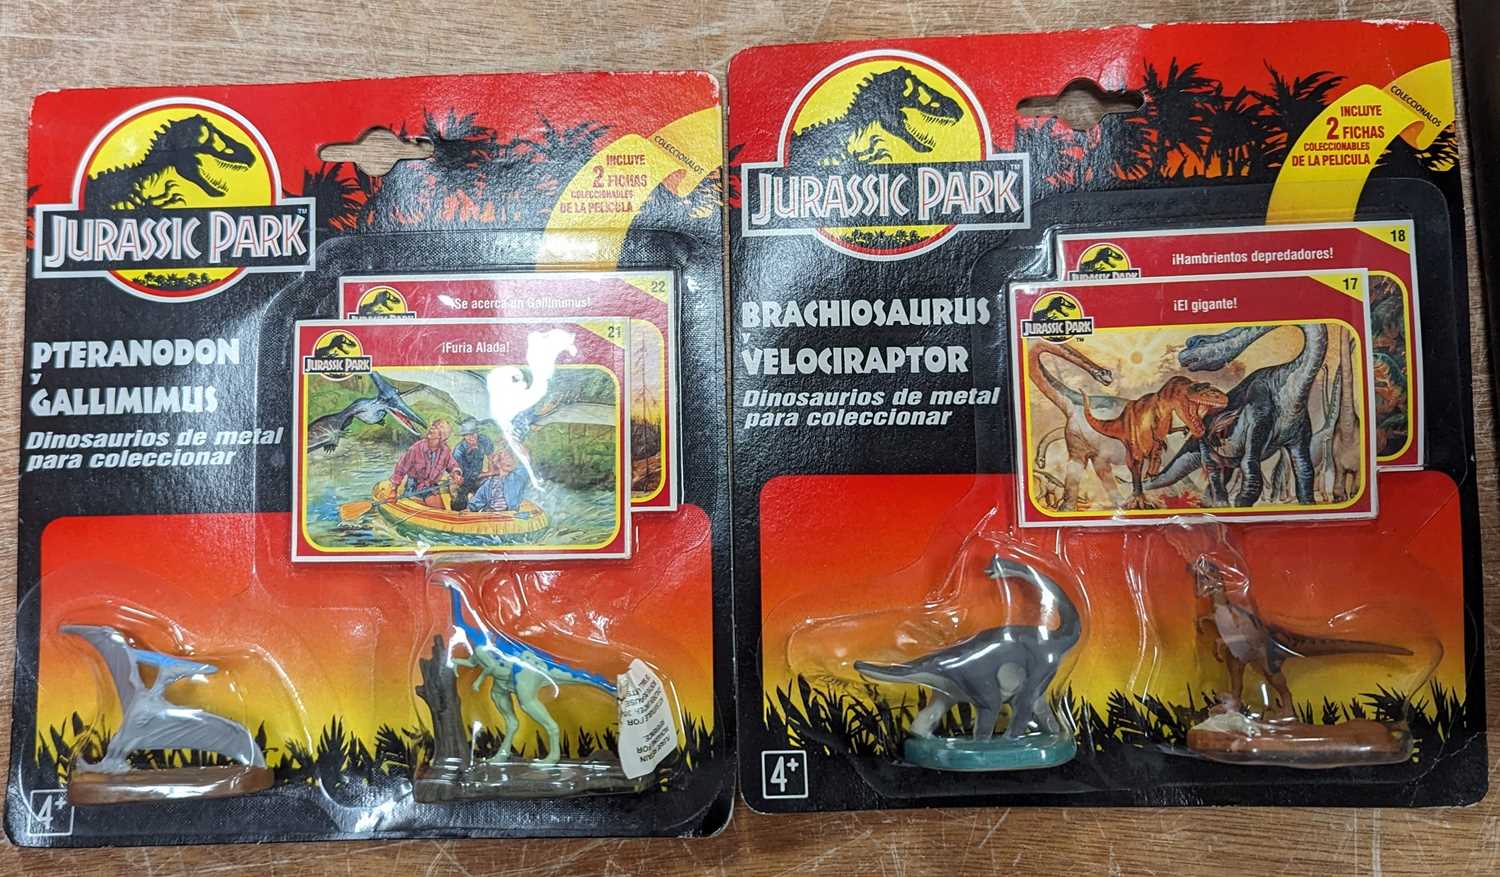 Two Kenner Jurassic Park dinosaur model sets, to include Pteranodon, Gallimimus, Brachiosaurus and